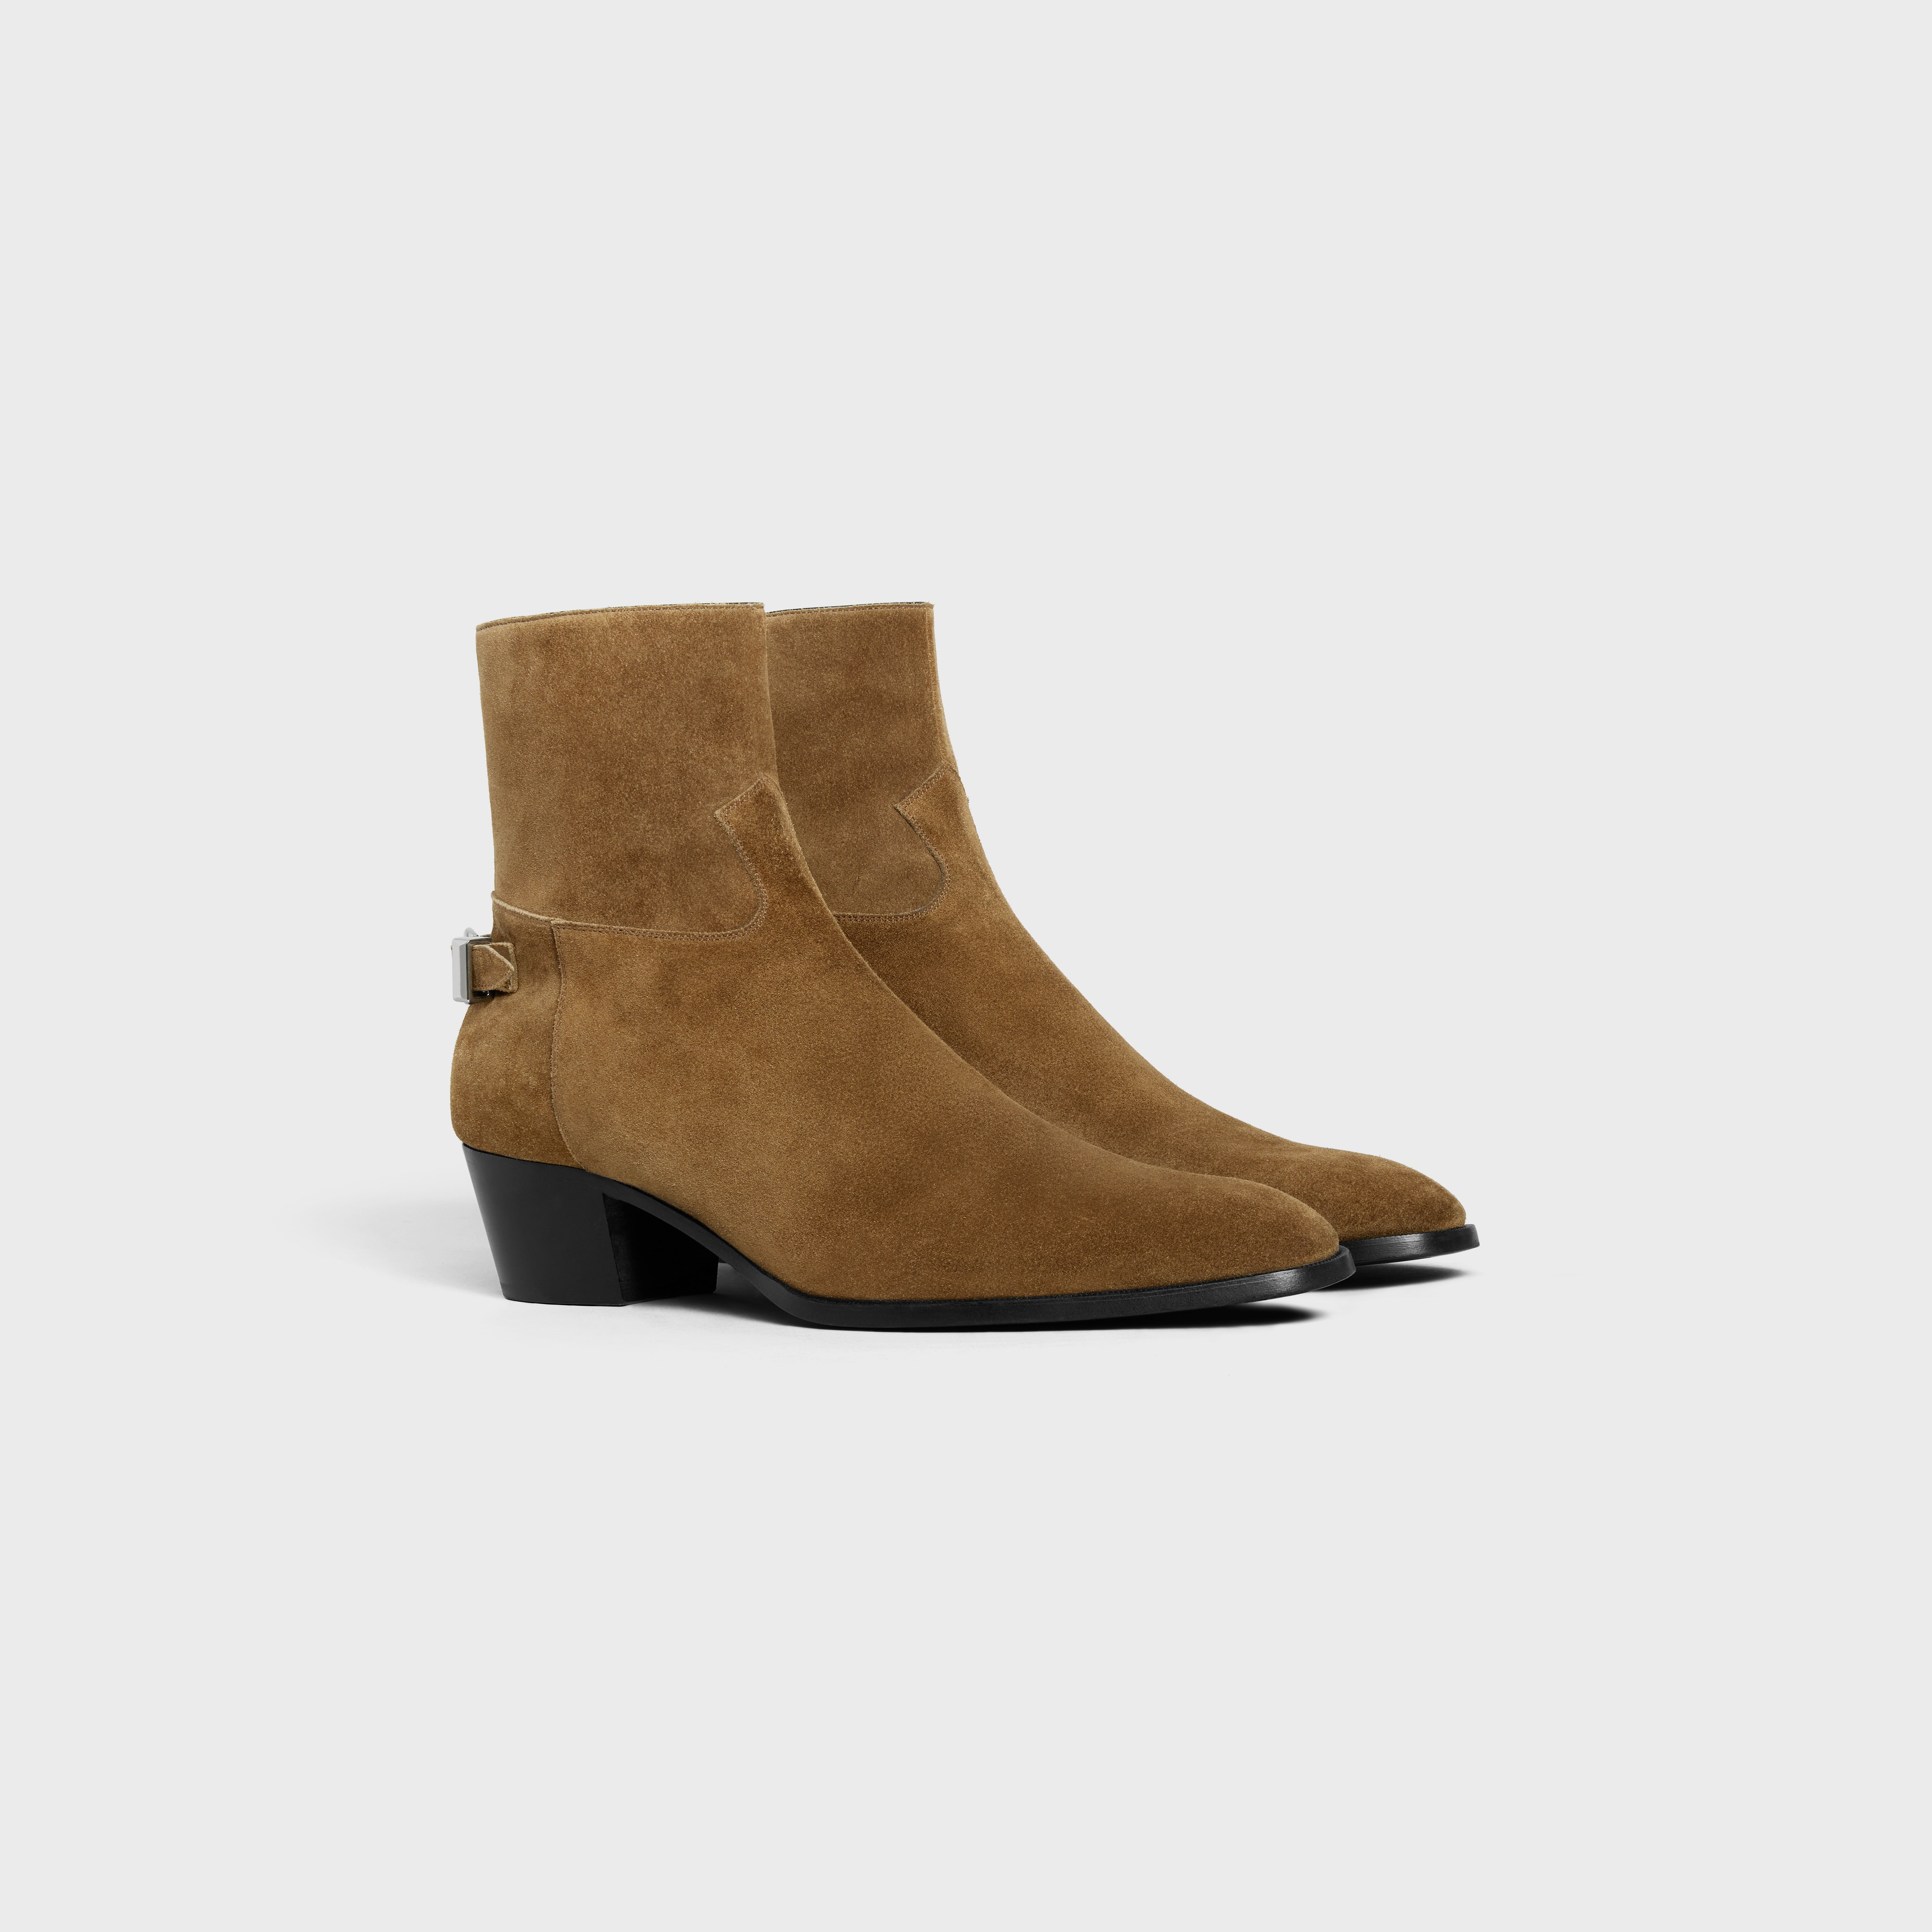 BACK BUCKLE ZIPPED ISAAC BOOT in Suede Calfskin - 2